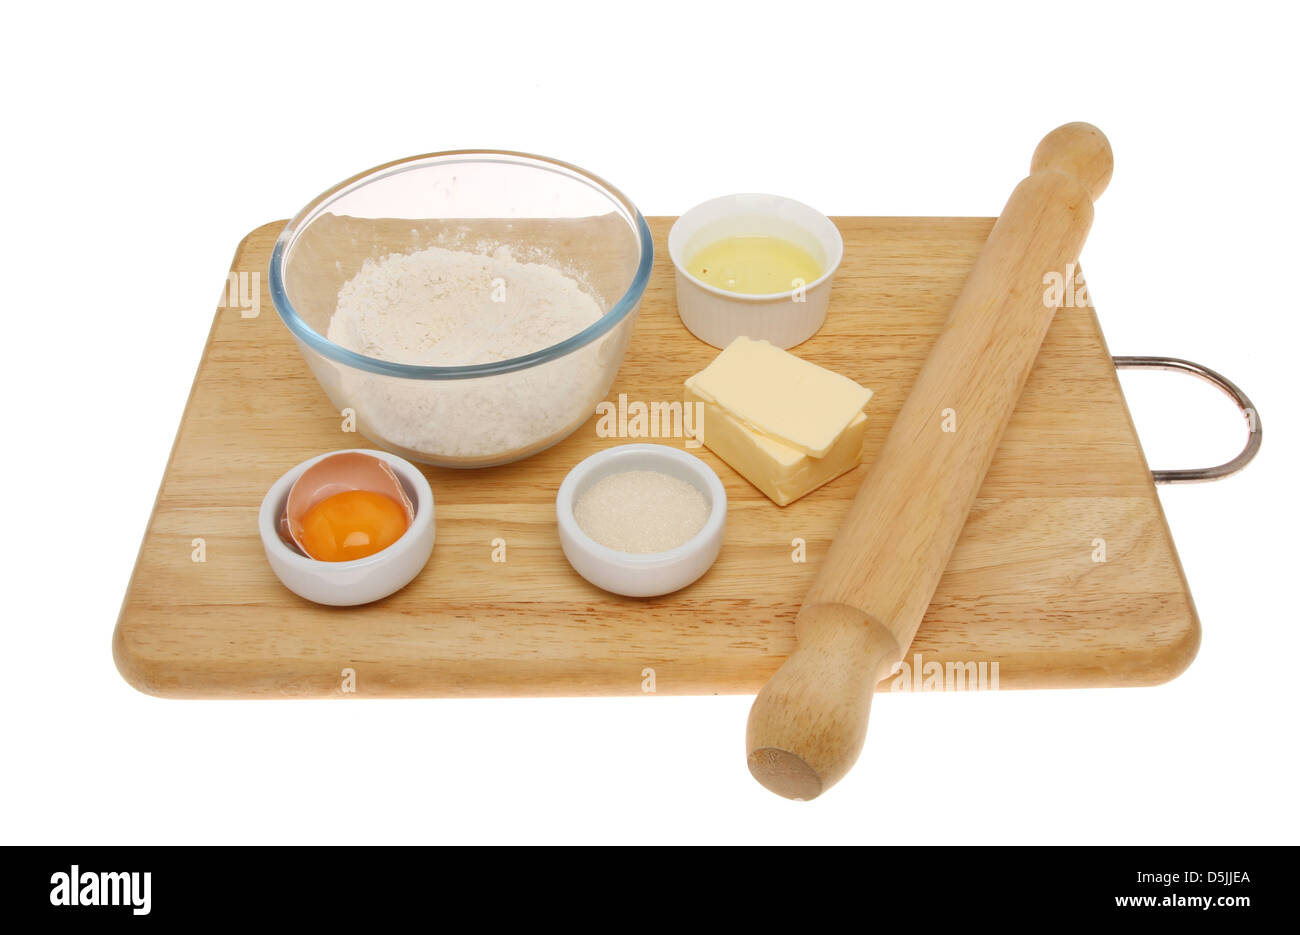 Ingredients for making pastry and a rolling pin on a wooden board isolated against white Stock Photo